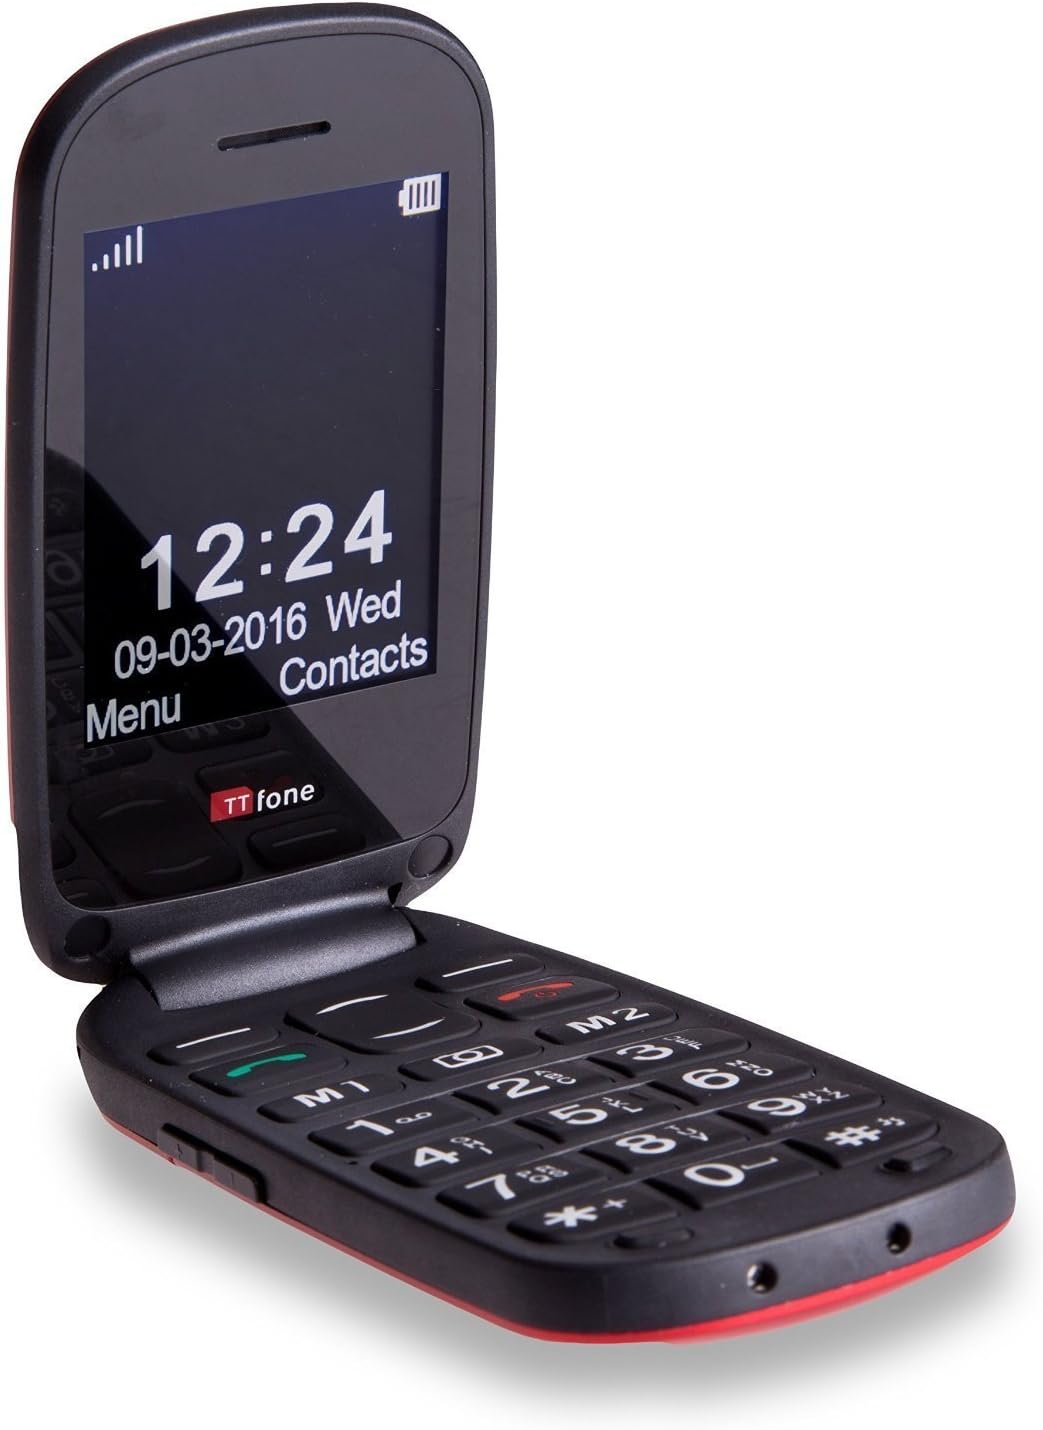 TTfone Red Lunar TT750 No Dock No Charger - Warehouse Deals with Vodafone Pay As You Go